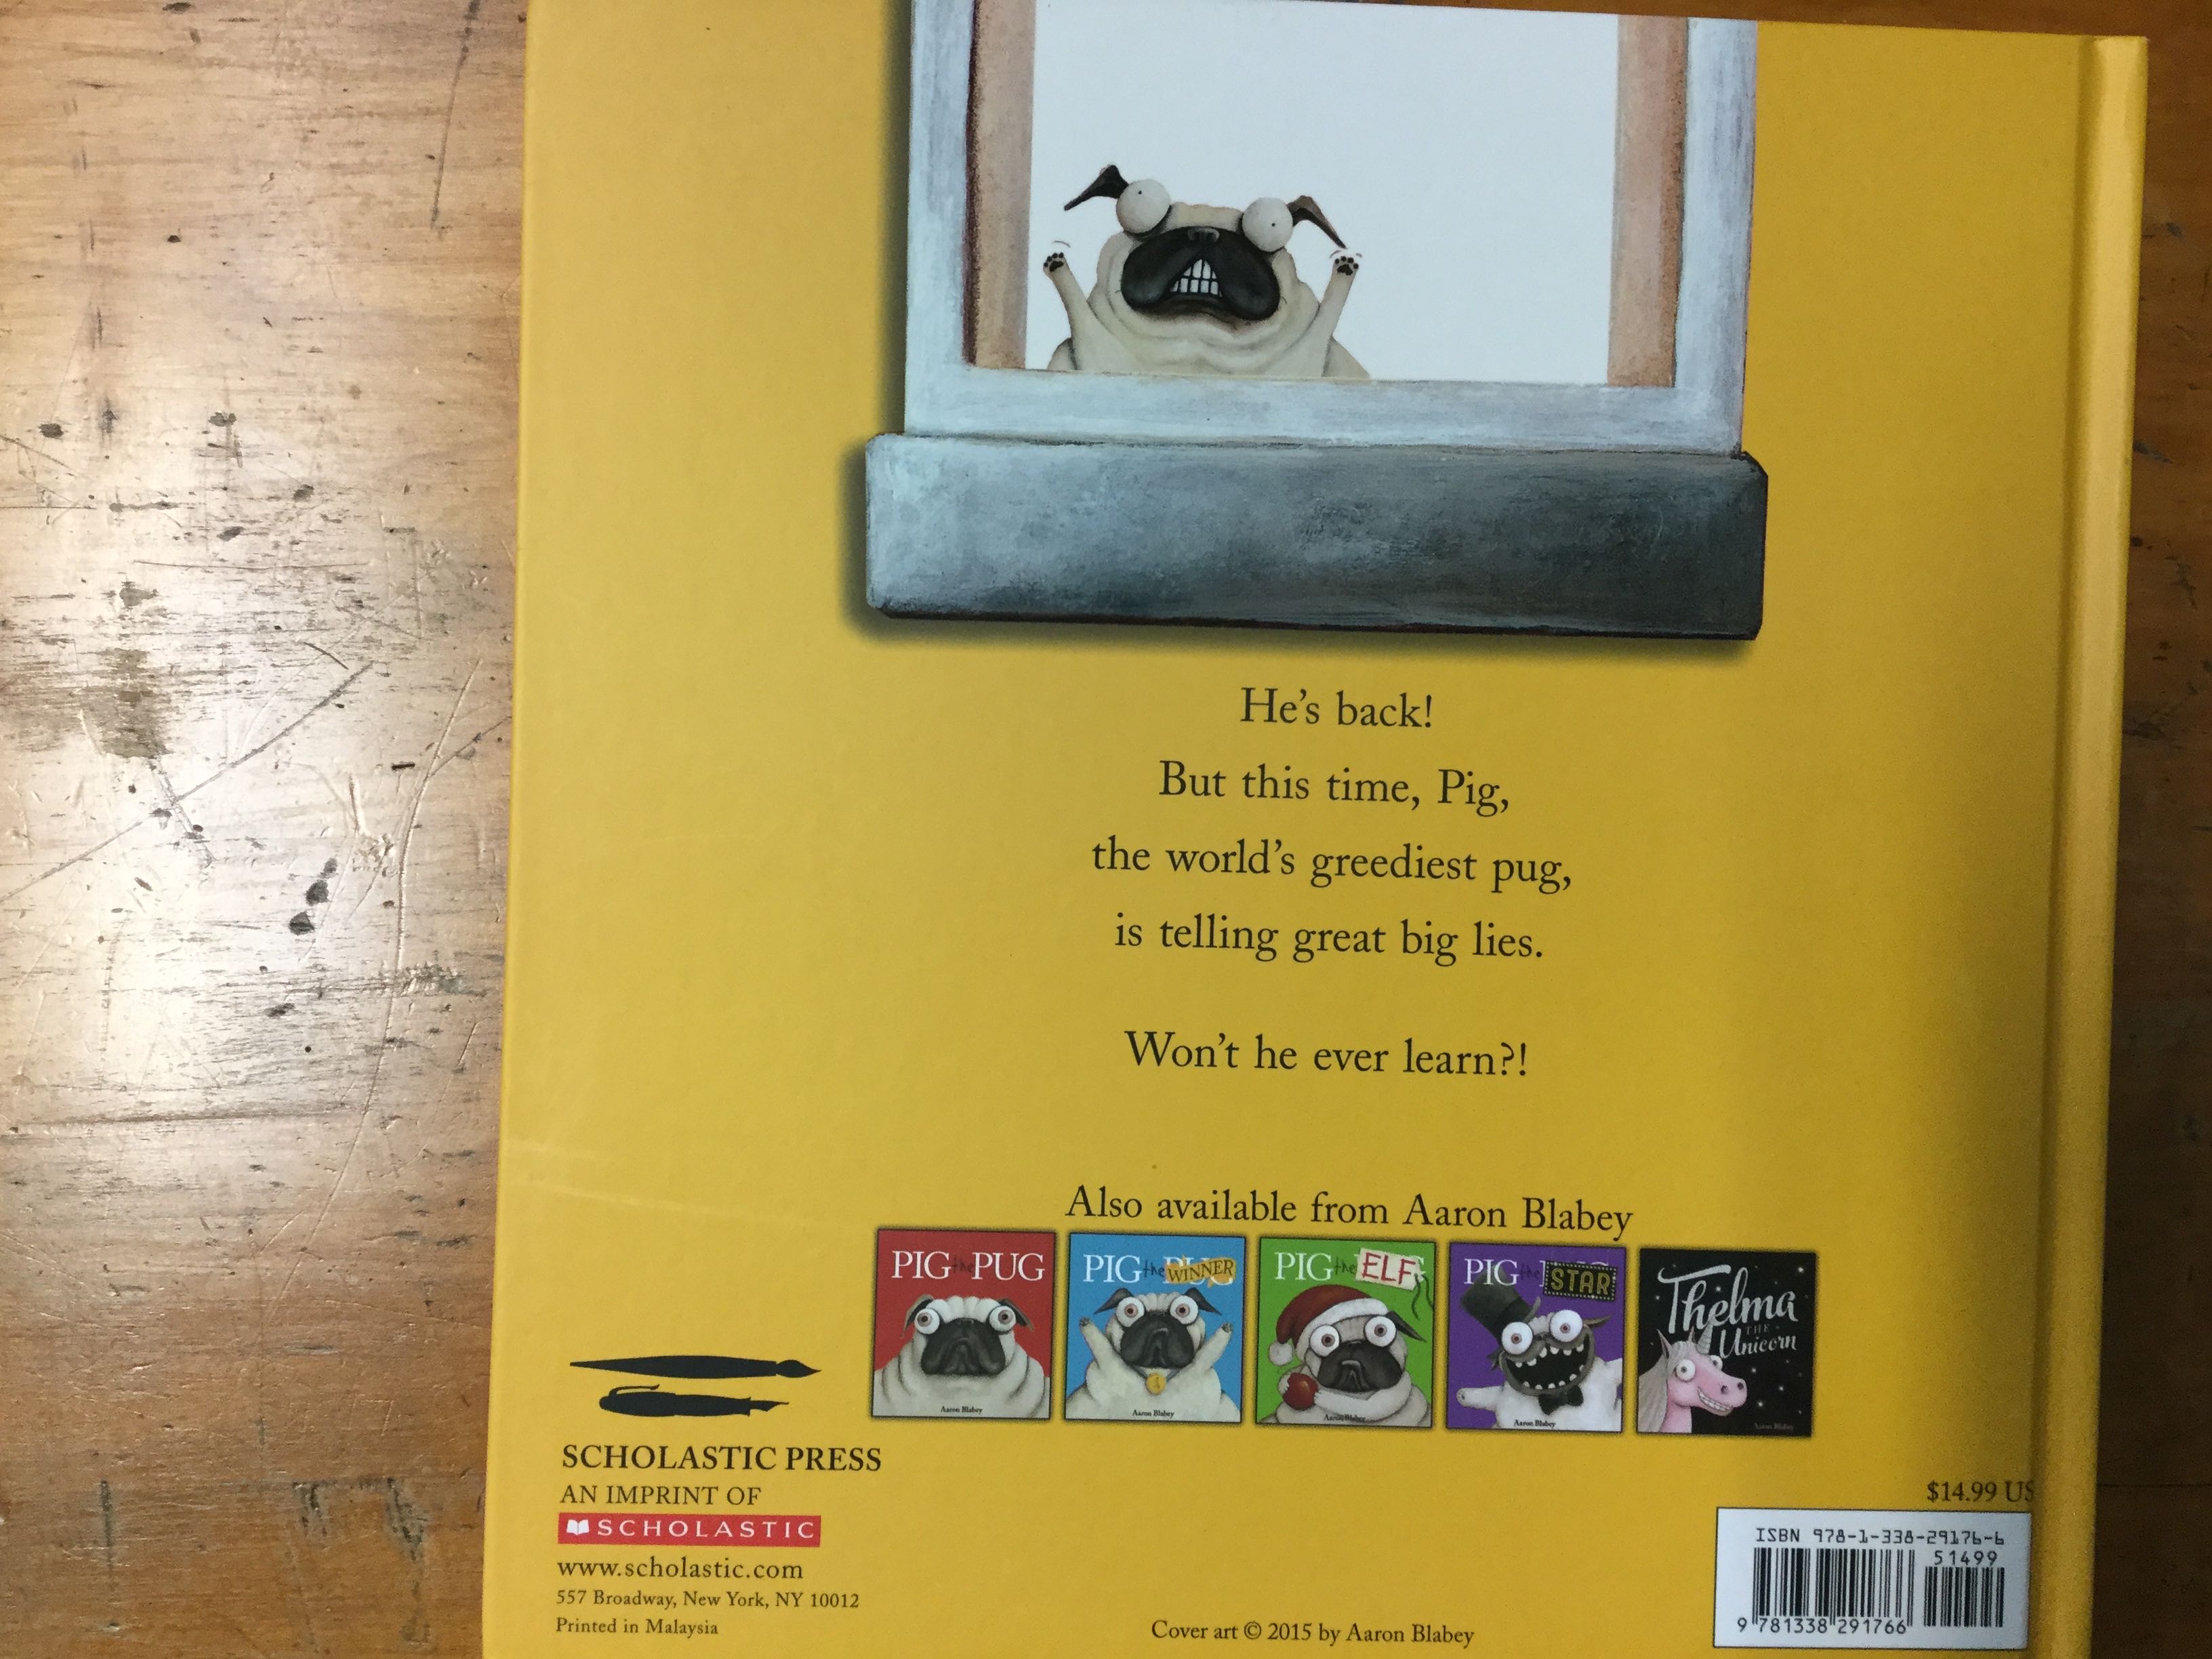 Pig The Fibber - Aaron Blabey (Pig the Pug - Hardcover) book collectible [Barcode 9781338291766] - Main Image 2